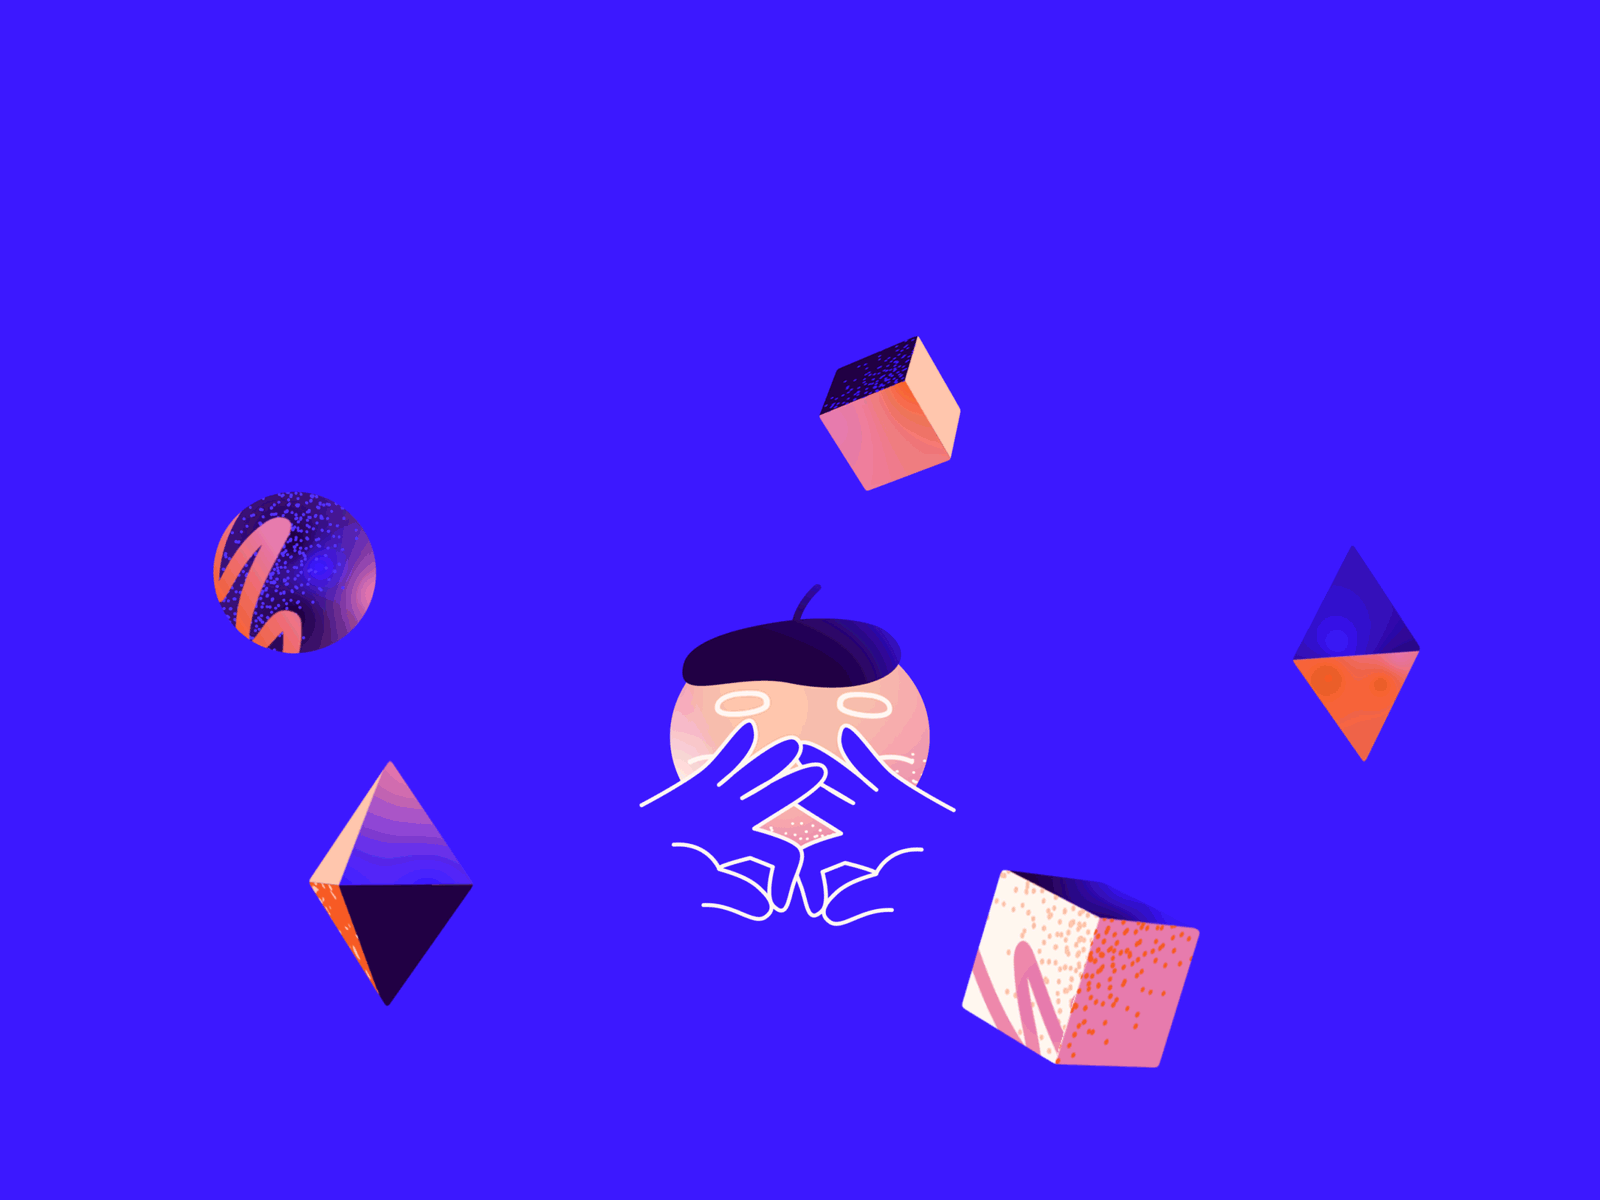 3D Geometry In After Effects designs, themes, templates and downloadable  graphic elements on Dribbble